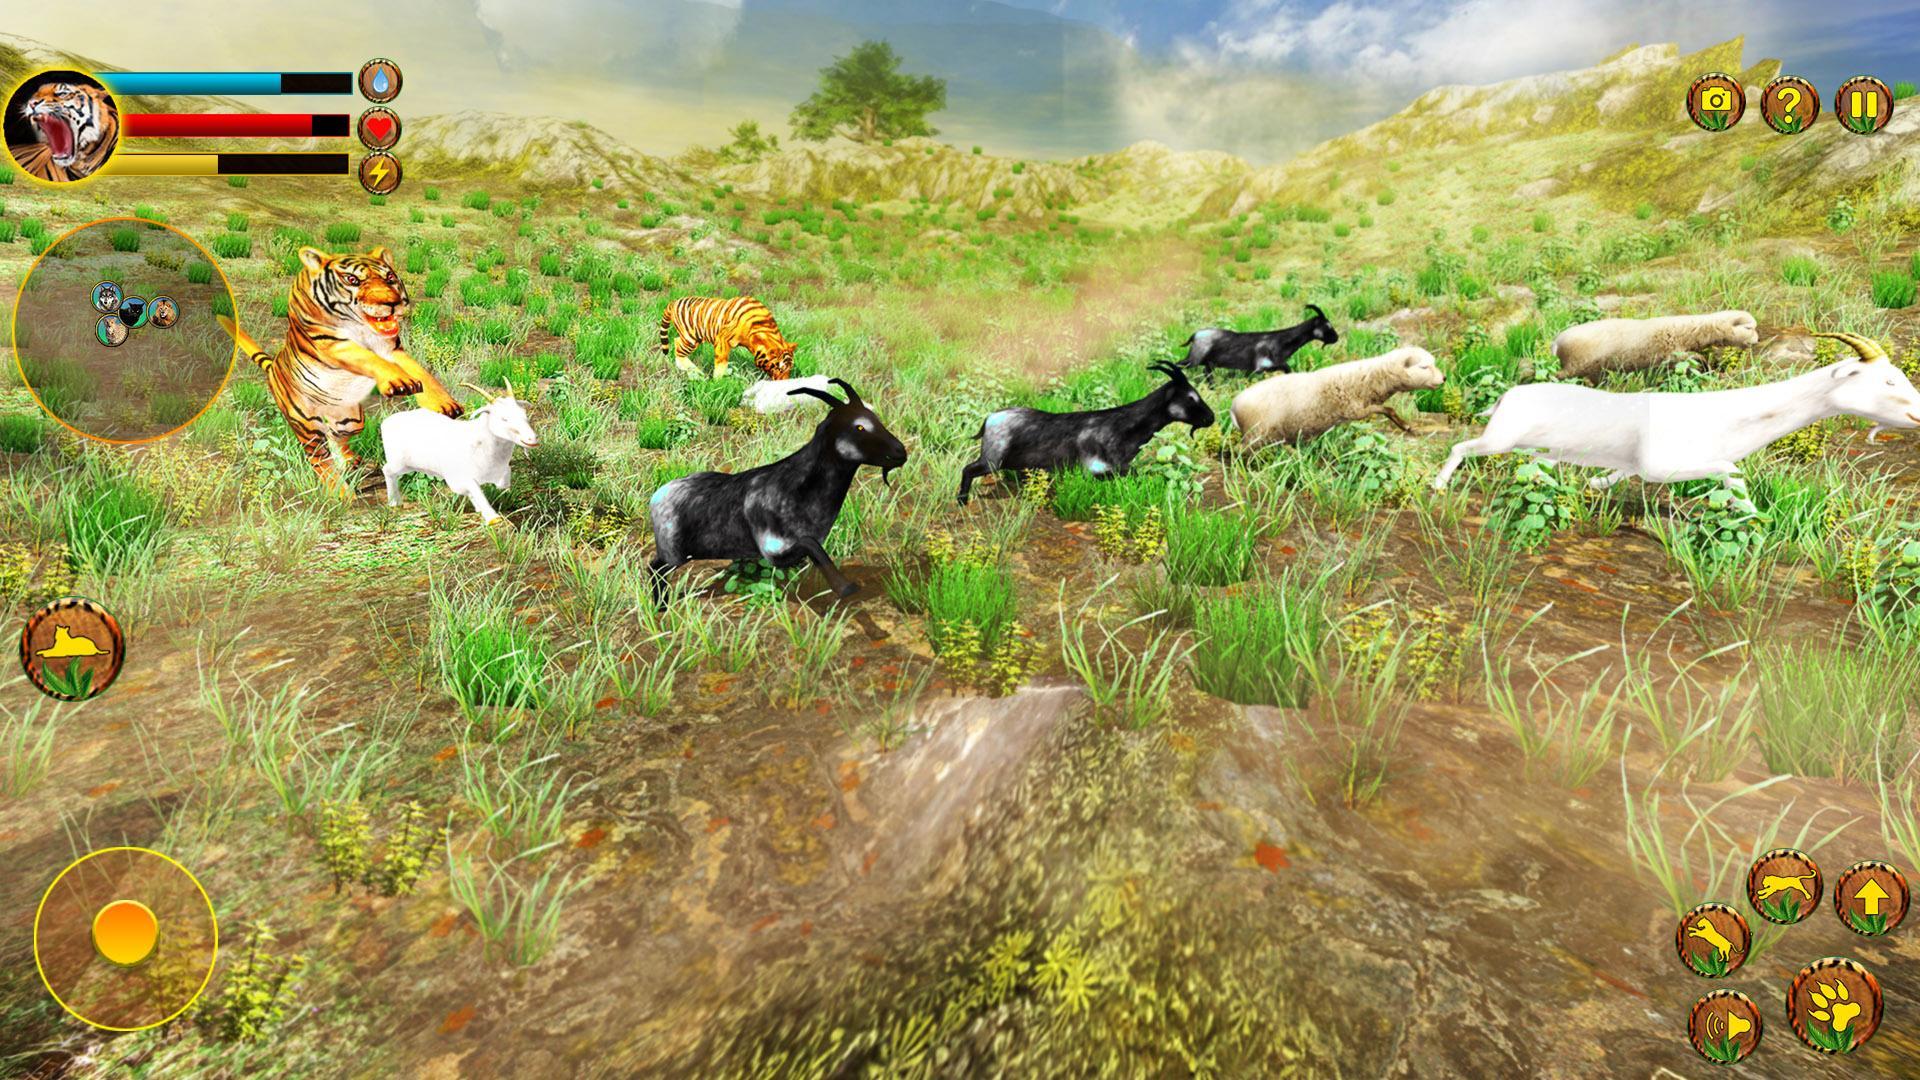 Realistic animal games on roblox